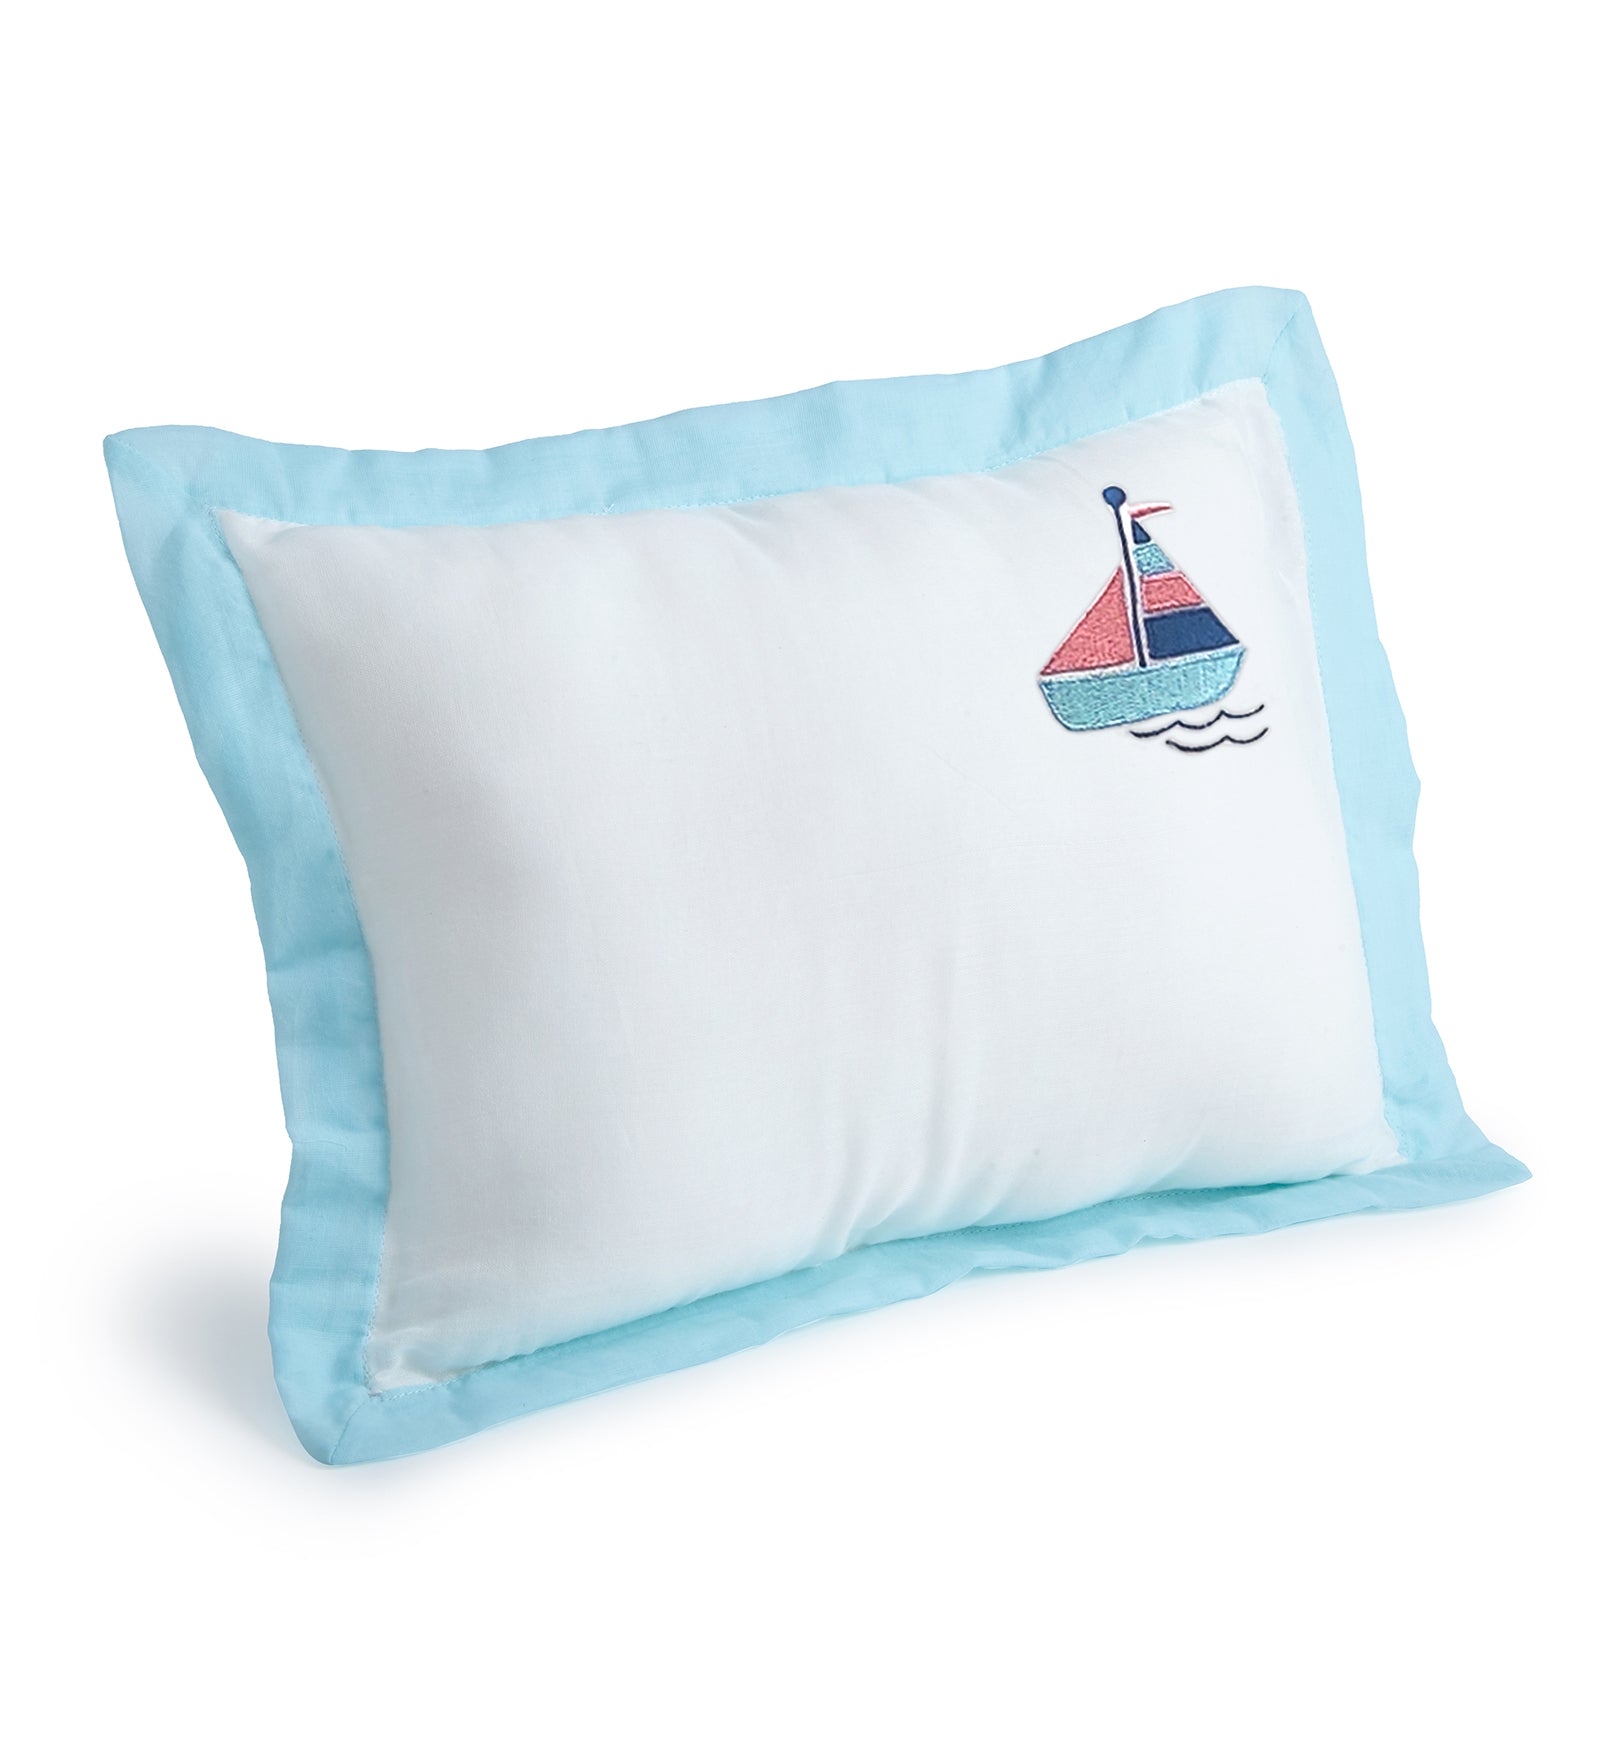 The White Cradle Cot Pillow + 2 Bolsters Set with Fillers - Organic Cotton Fabric, Softest Fiber Filling, Protective Comfort - Anchor